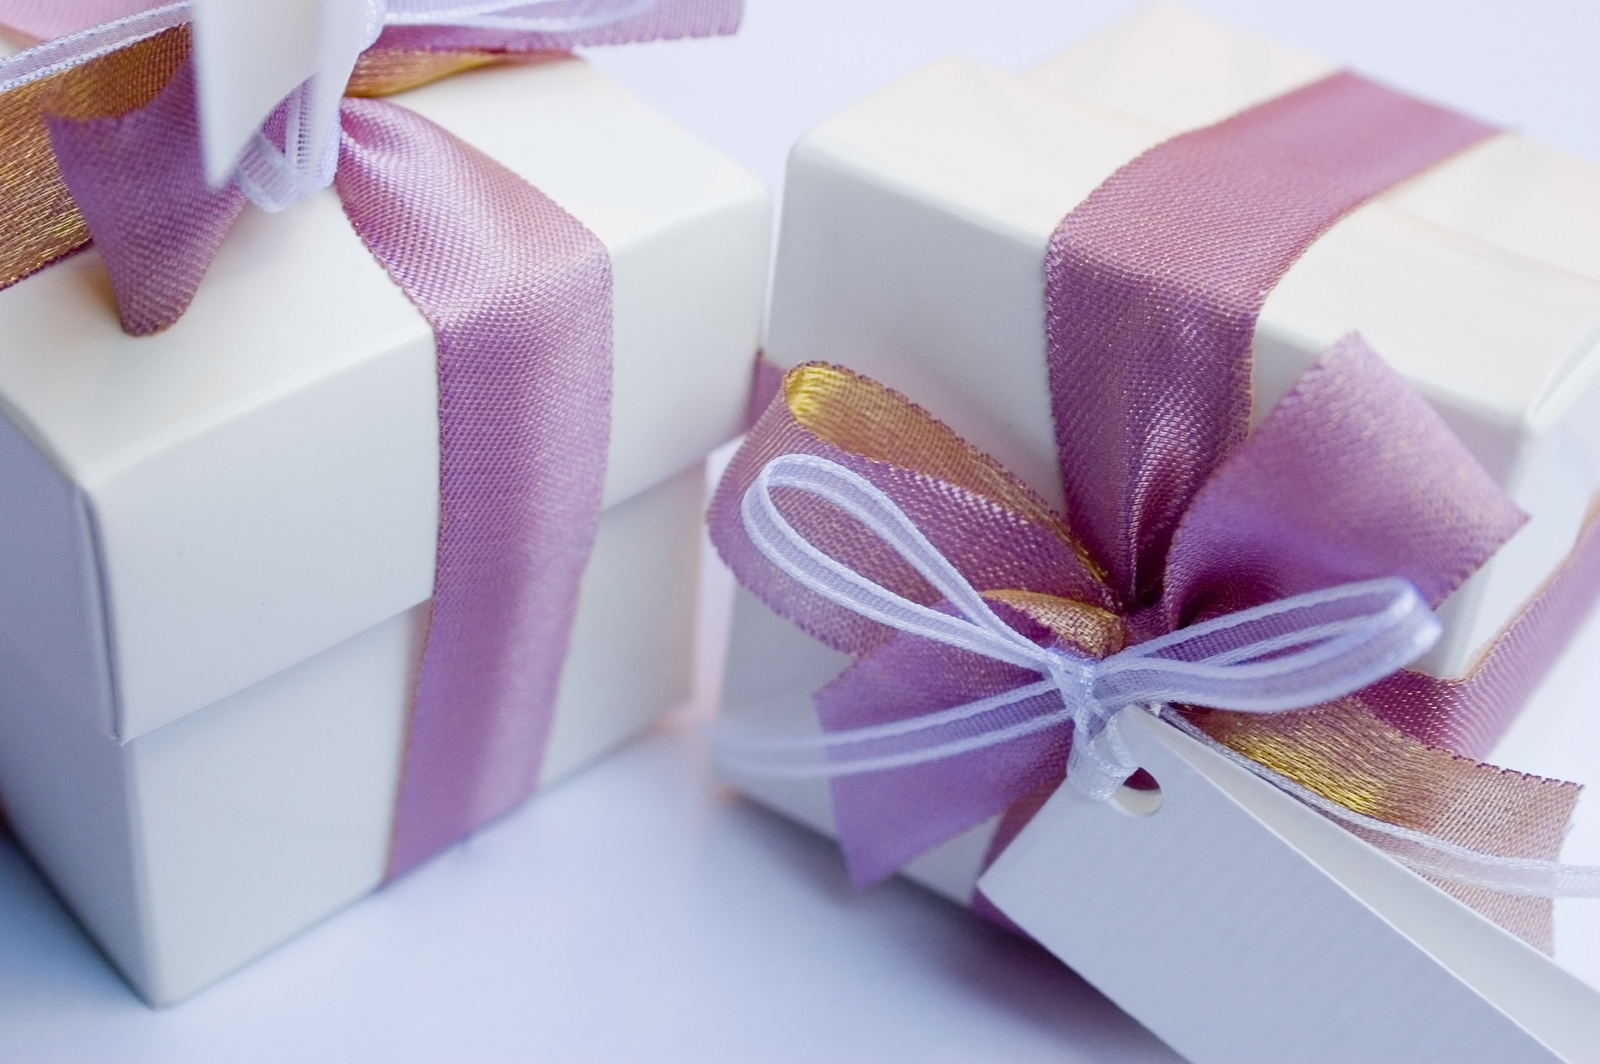 How Much Should I Spend on a Wedding Gift?